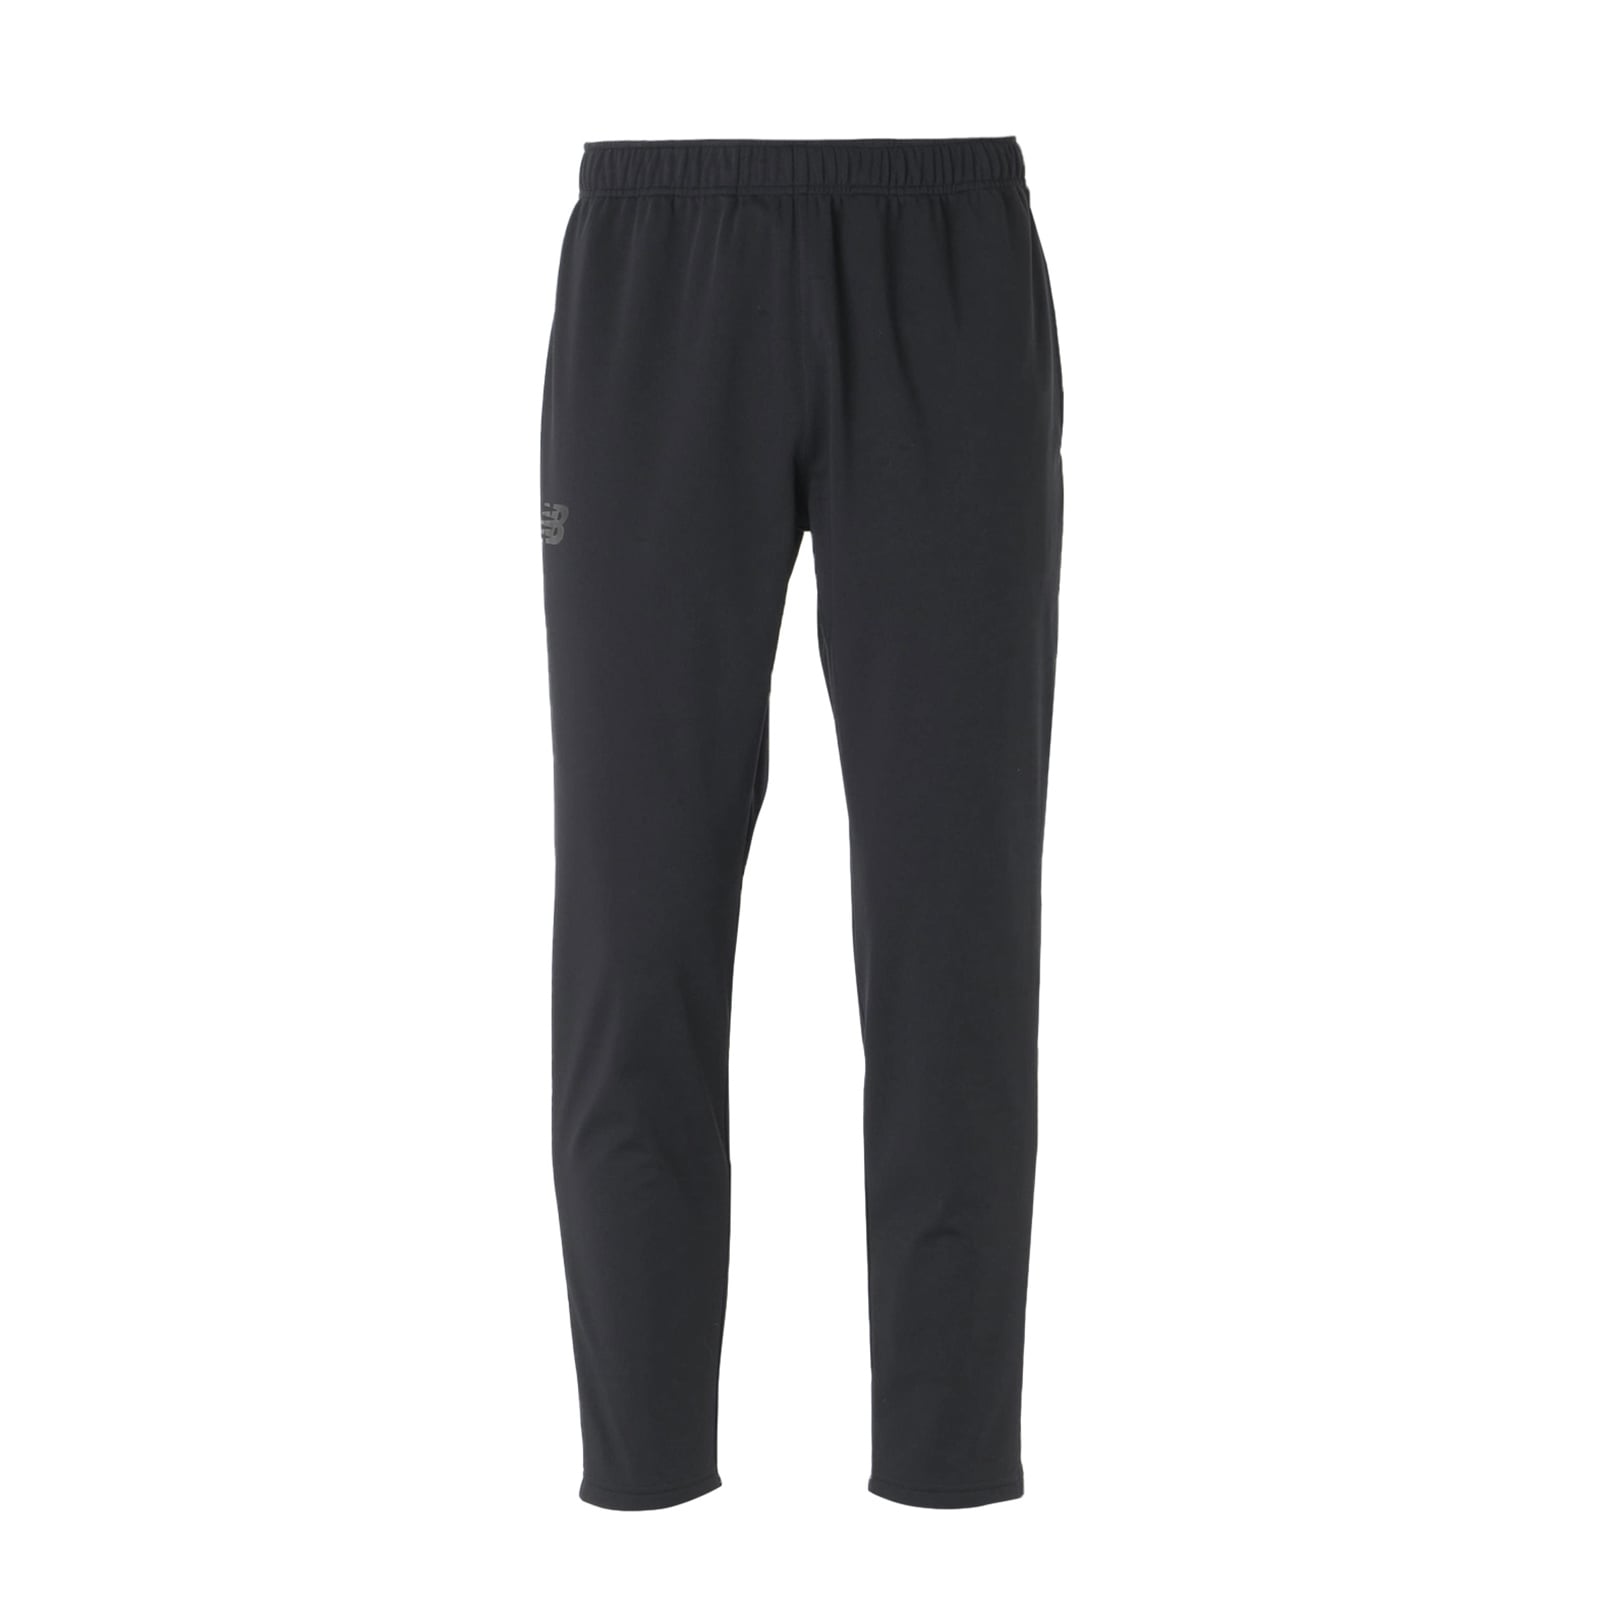 Black Out Collection Bonded Knit Pants